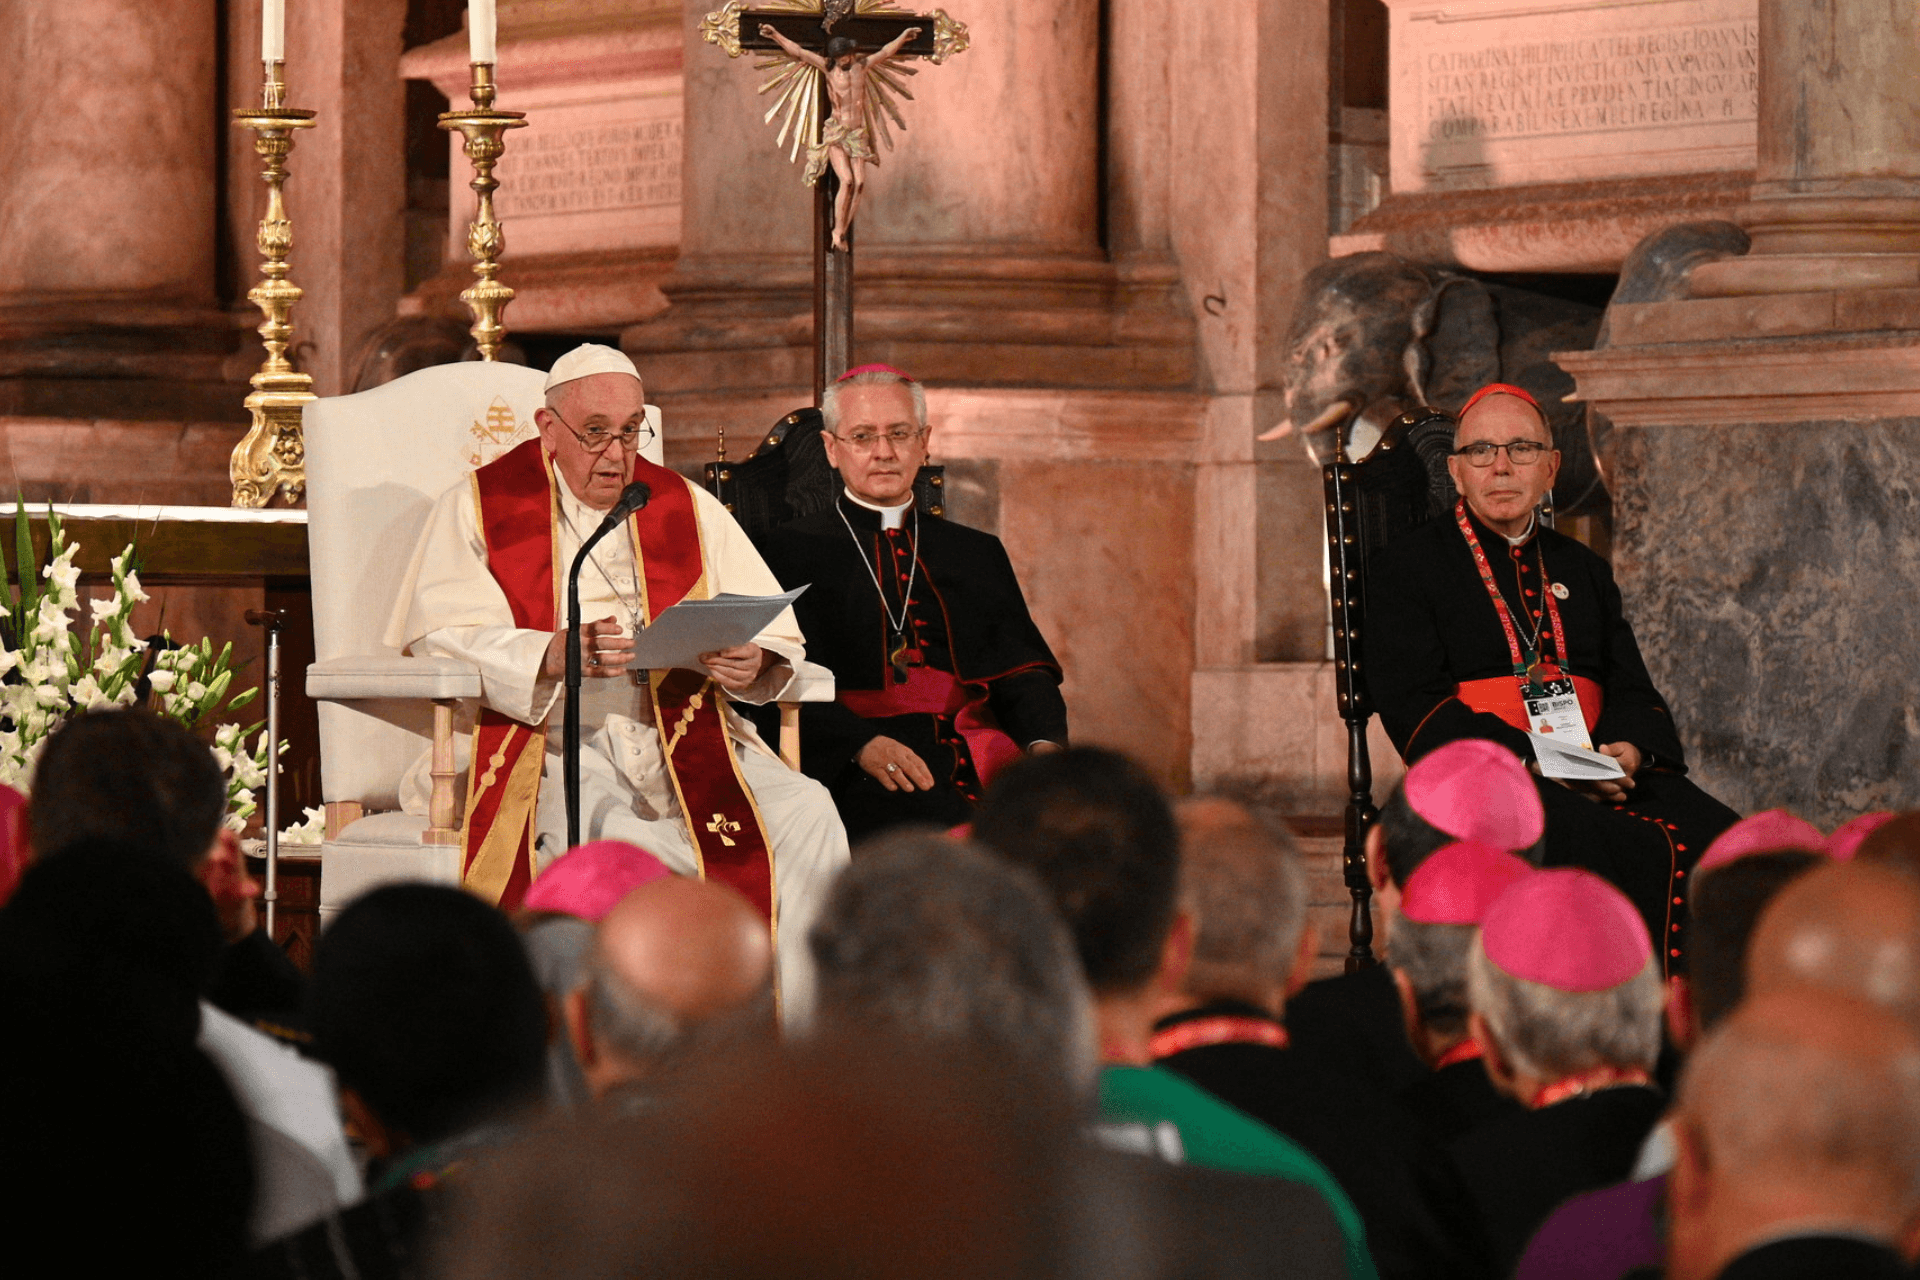 Featured image from the article: Pope's Homily at the Jeronimos Monastery